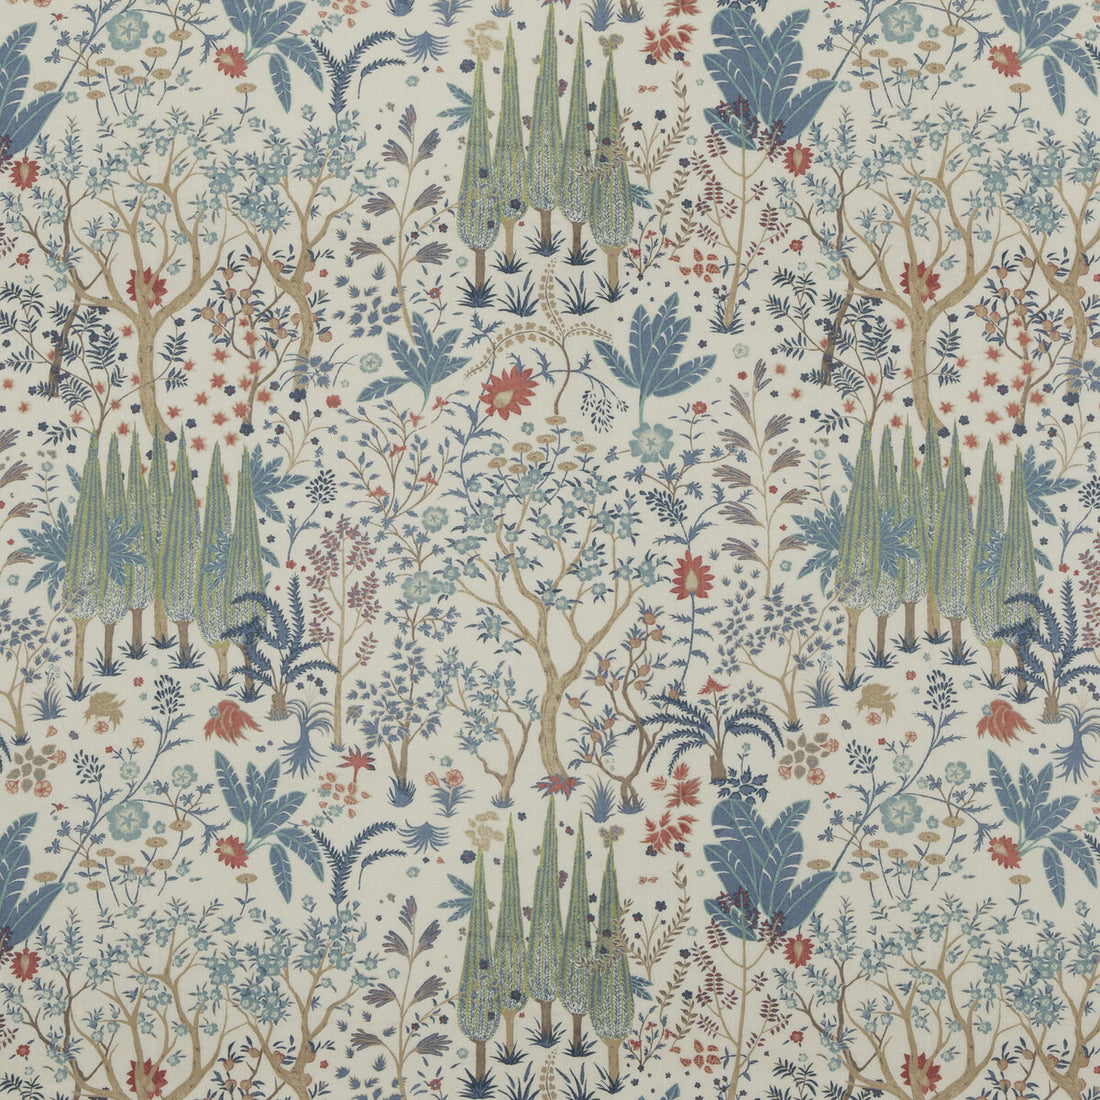 Bridport fabric in blue/red color - pattern PP50500.1.0 - by Baker Lifestyle in the Bridport collection